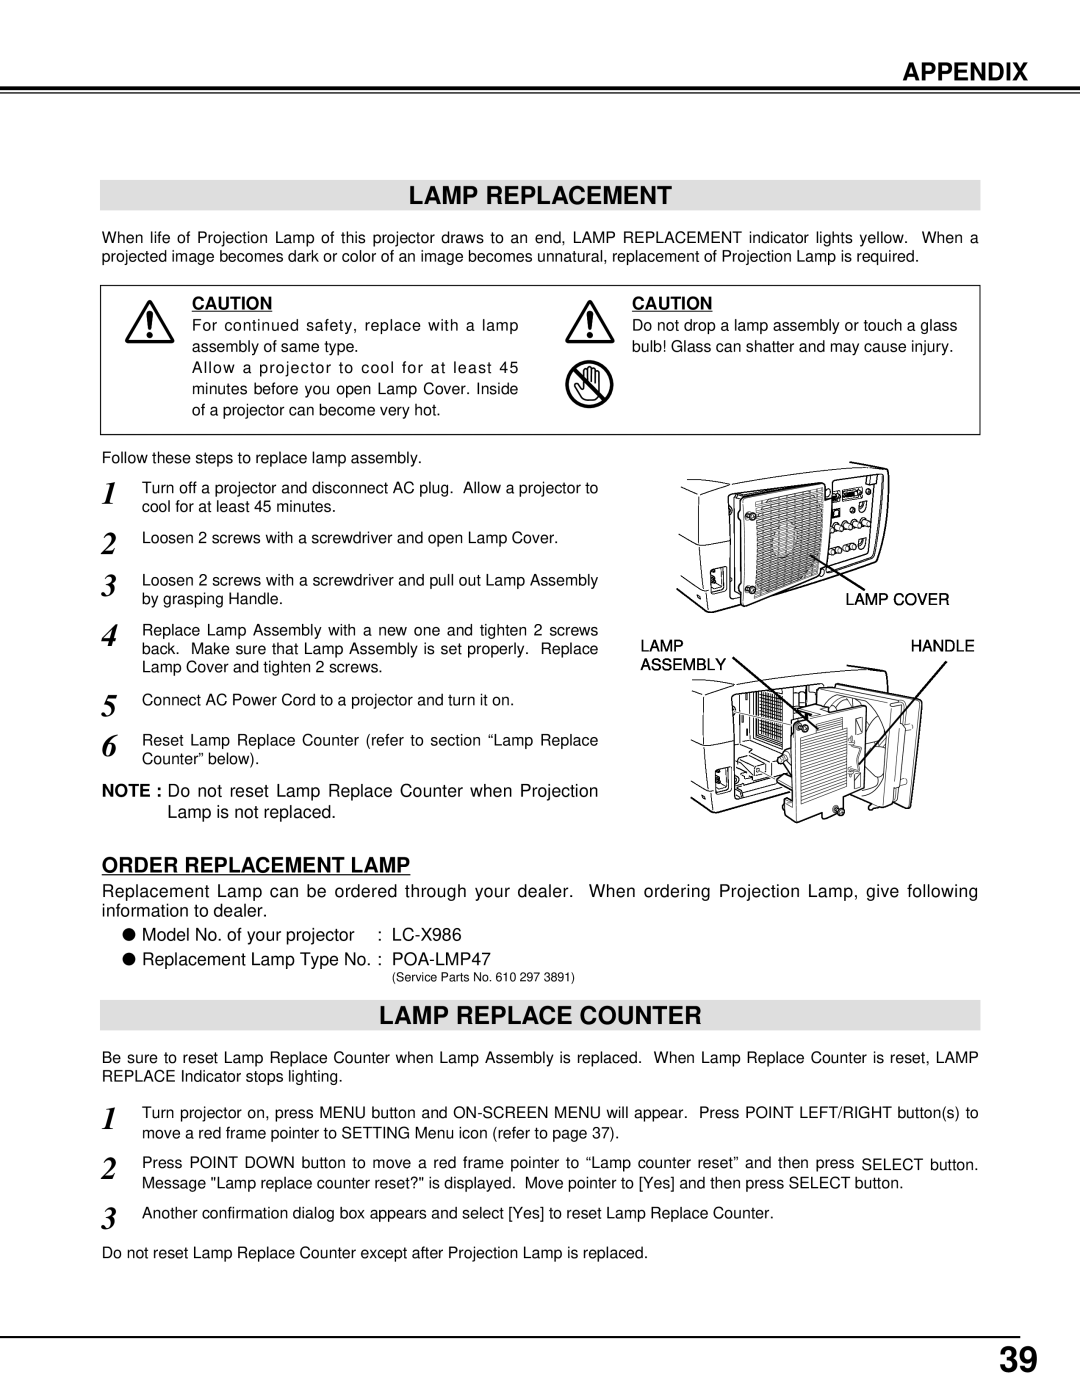 Eiki LC-X986 instruction manual Appendix Lamp Replacement, Lamp Replace Counter, Order Replacement Lamp 